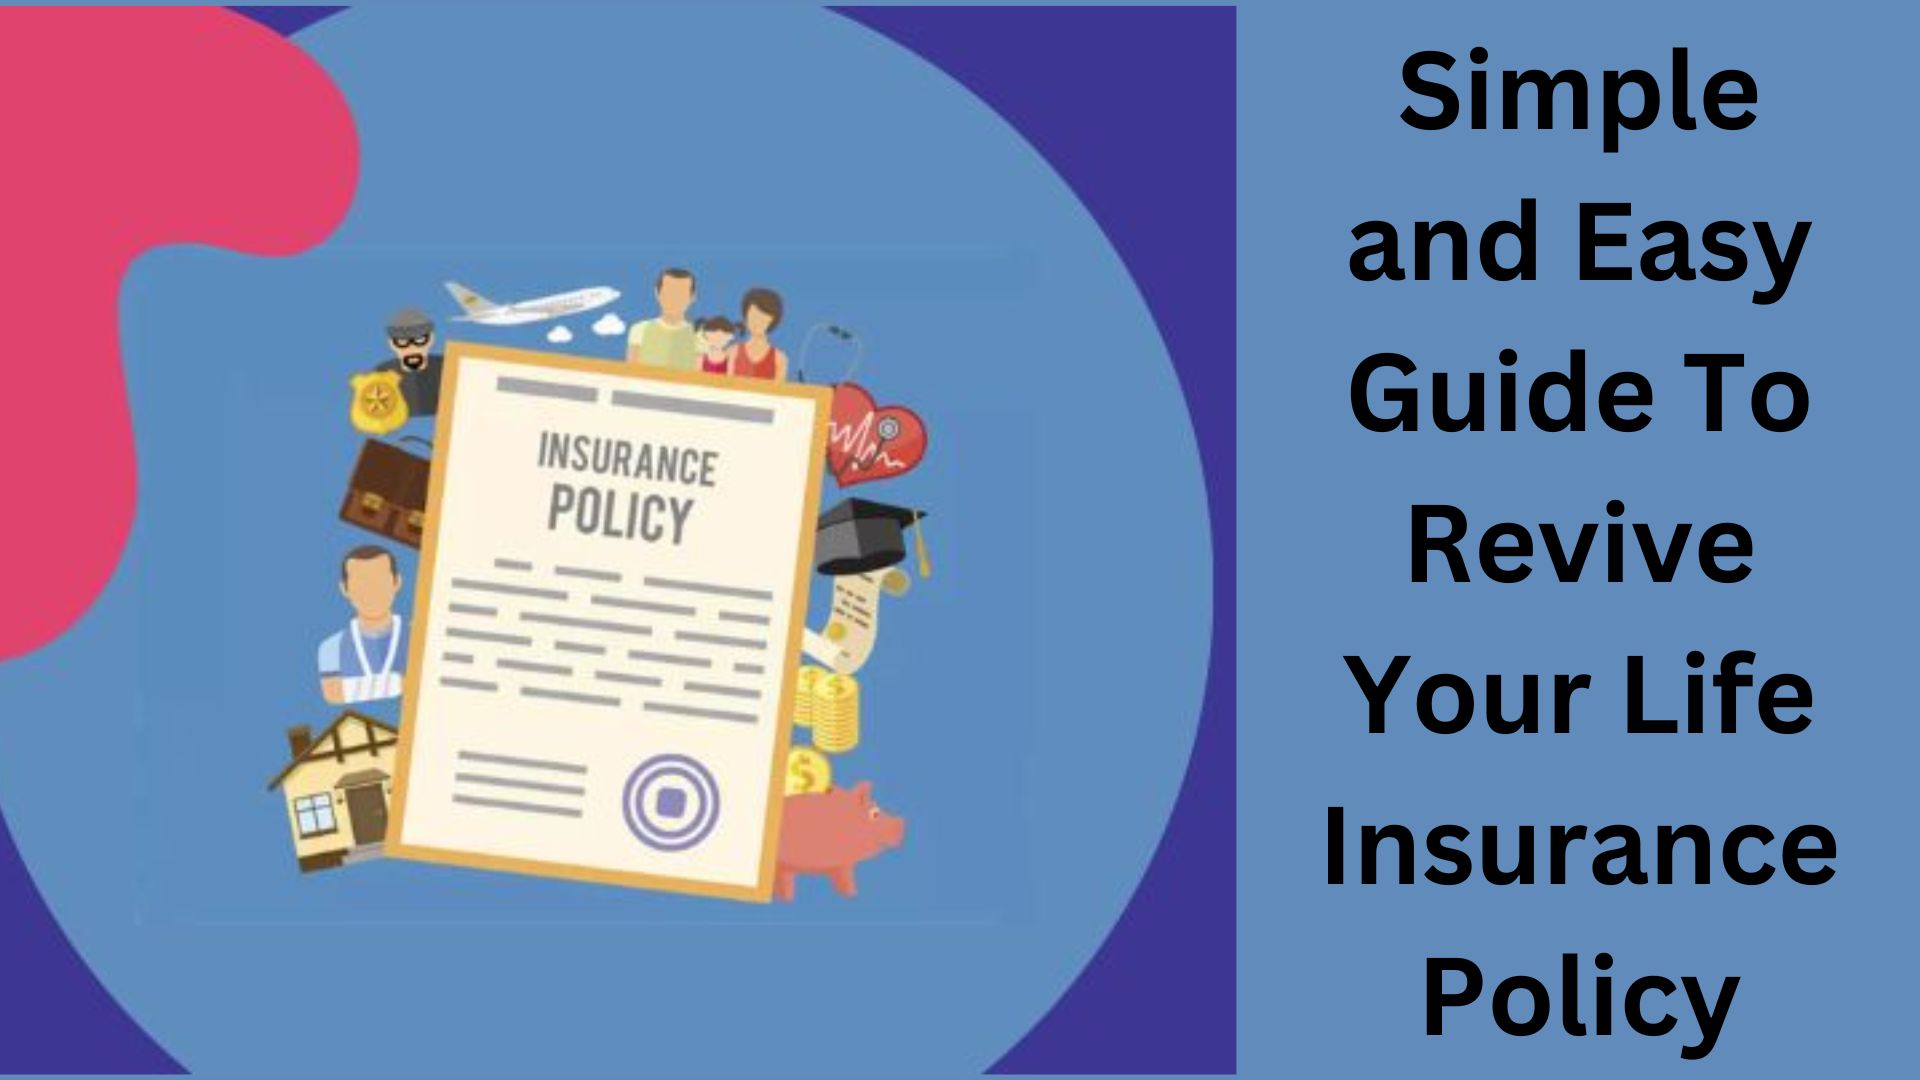 Simple and Easy Guide To Revive Your Life Insurance Policy